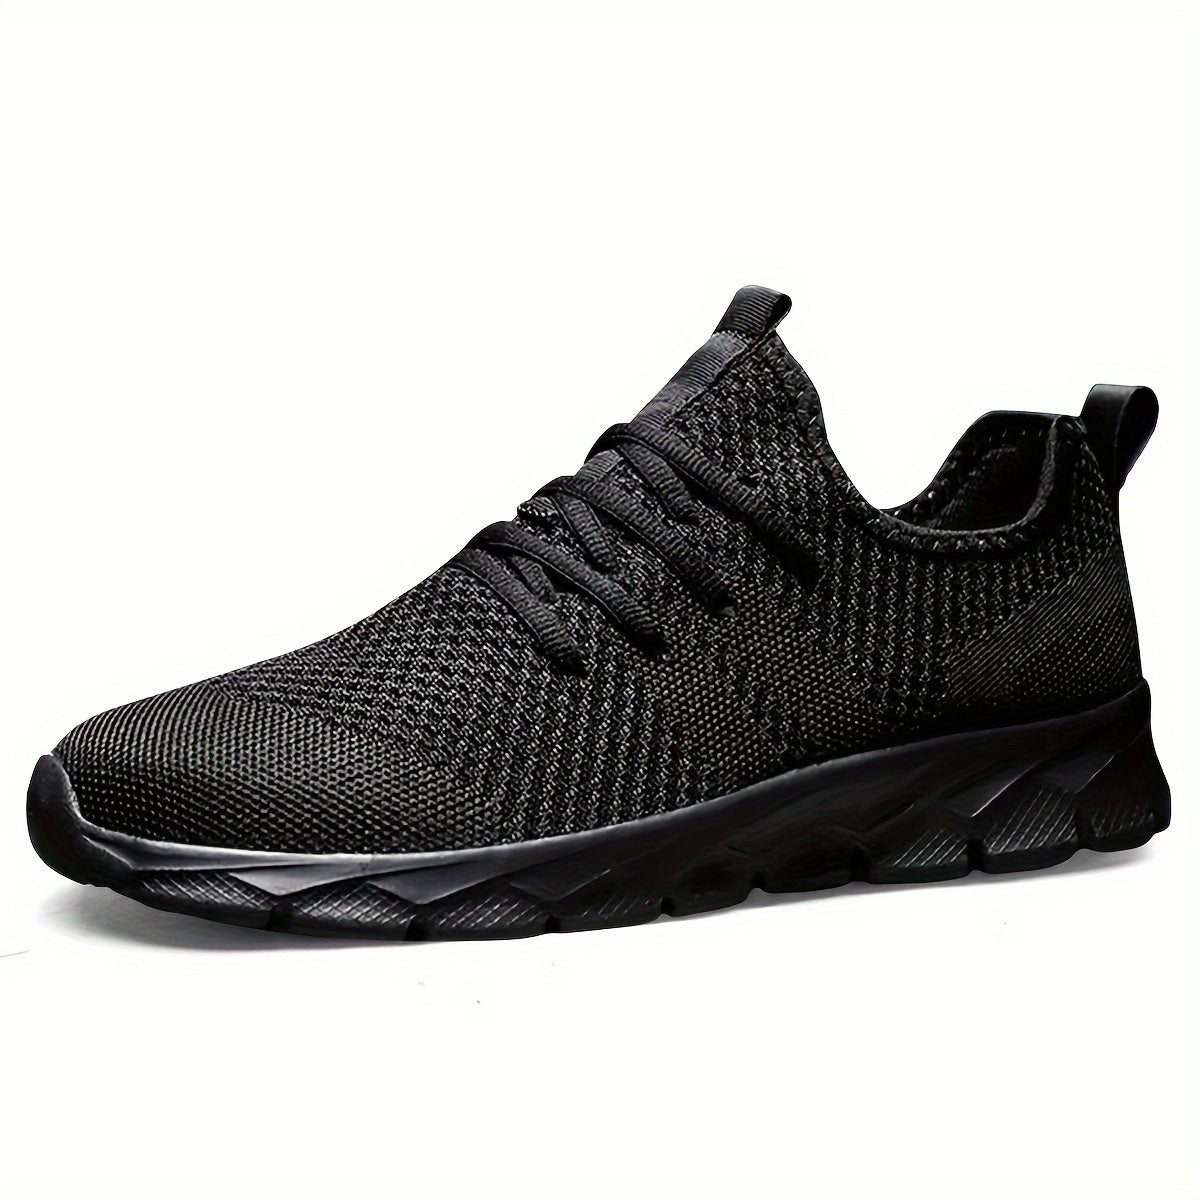 Men's Lightweight Sneakers, Athletic Shoes, Breathable Lace-ups